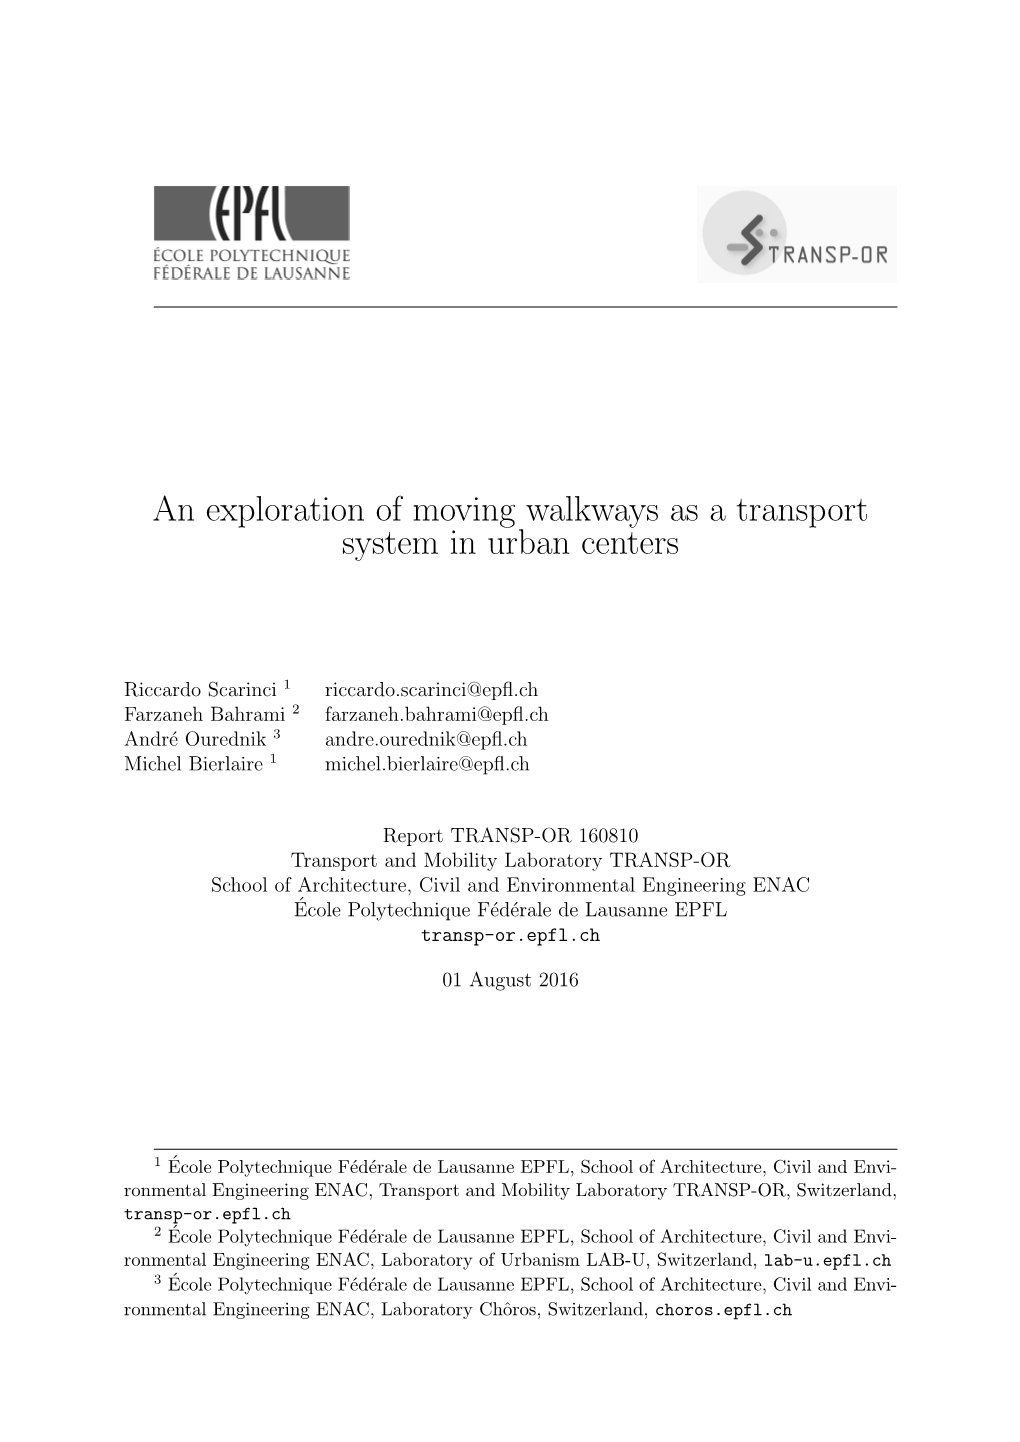 An Exploration of Moving Walkways As a Transport System in Urban Centers